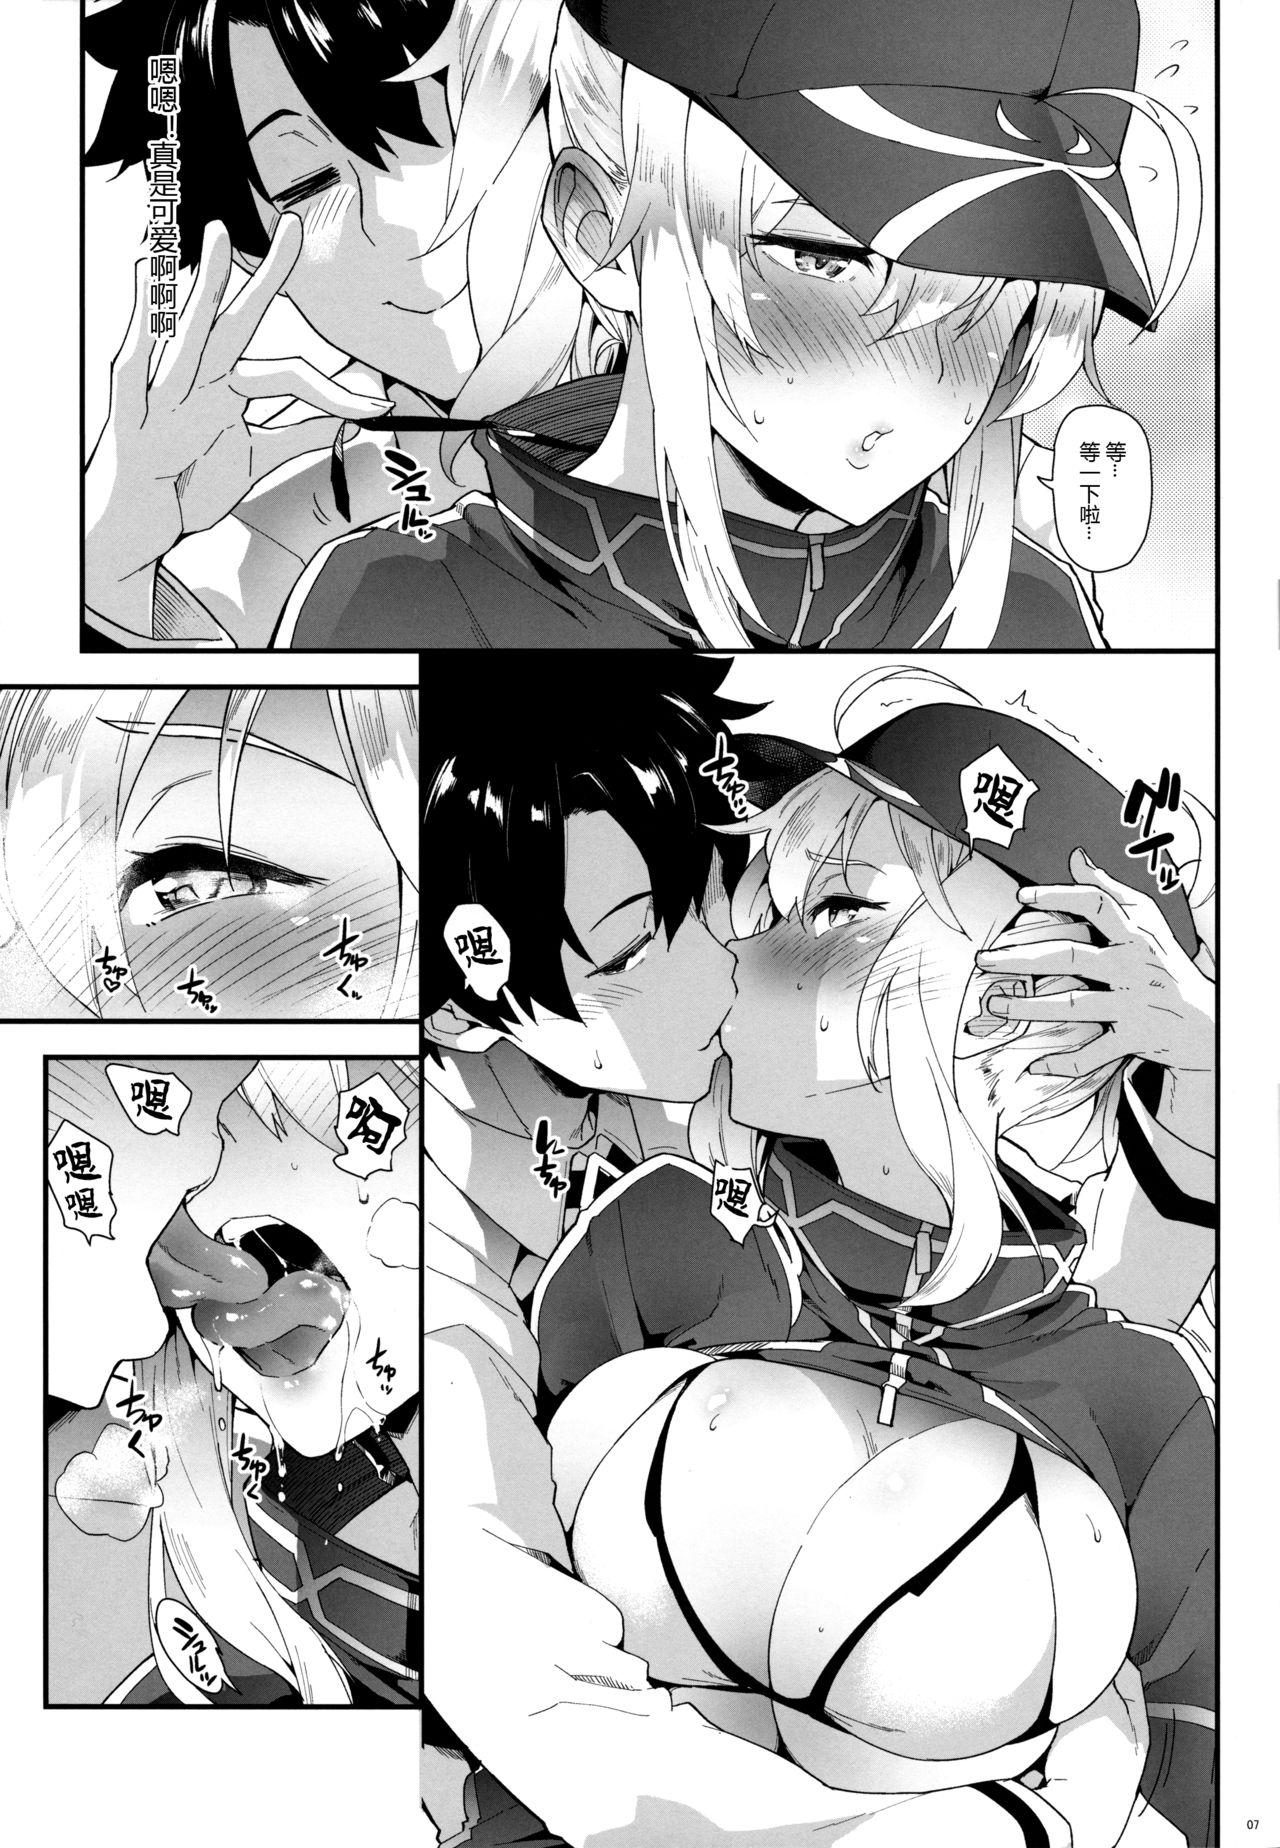 Hunk Foreign! Foreign? XX!? - Fate grand order Bangladeshi - Page 7